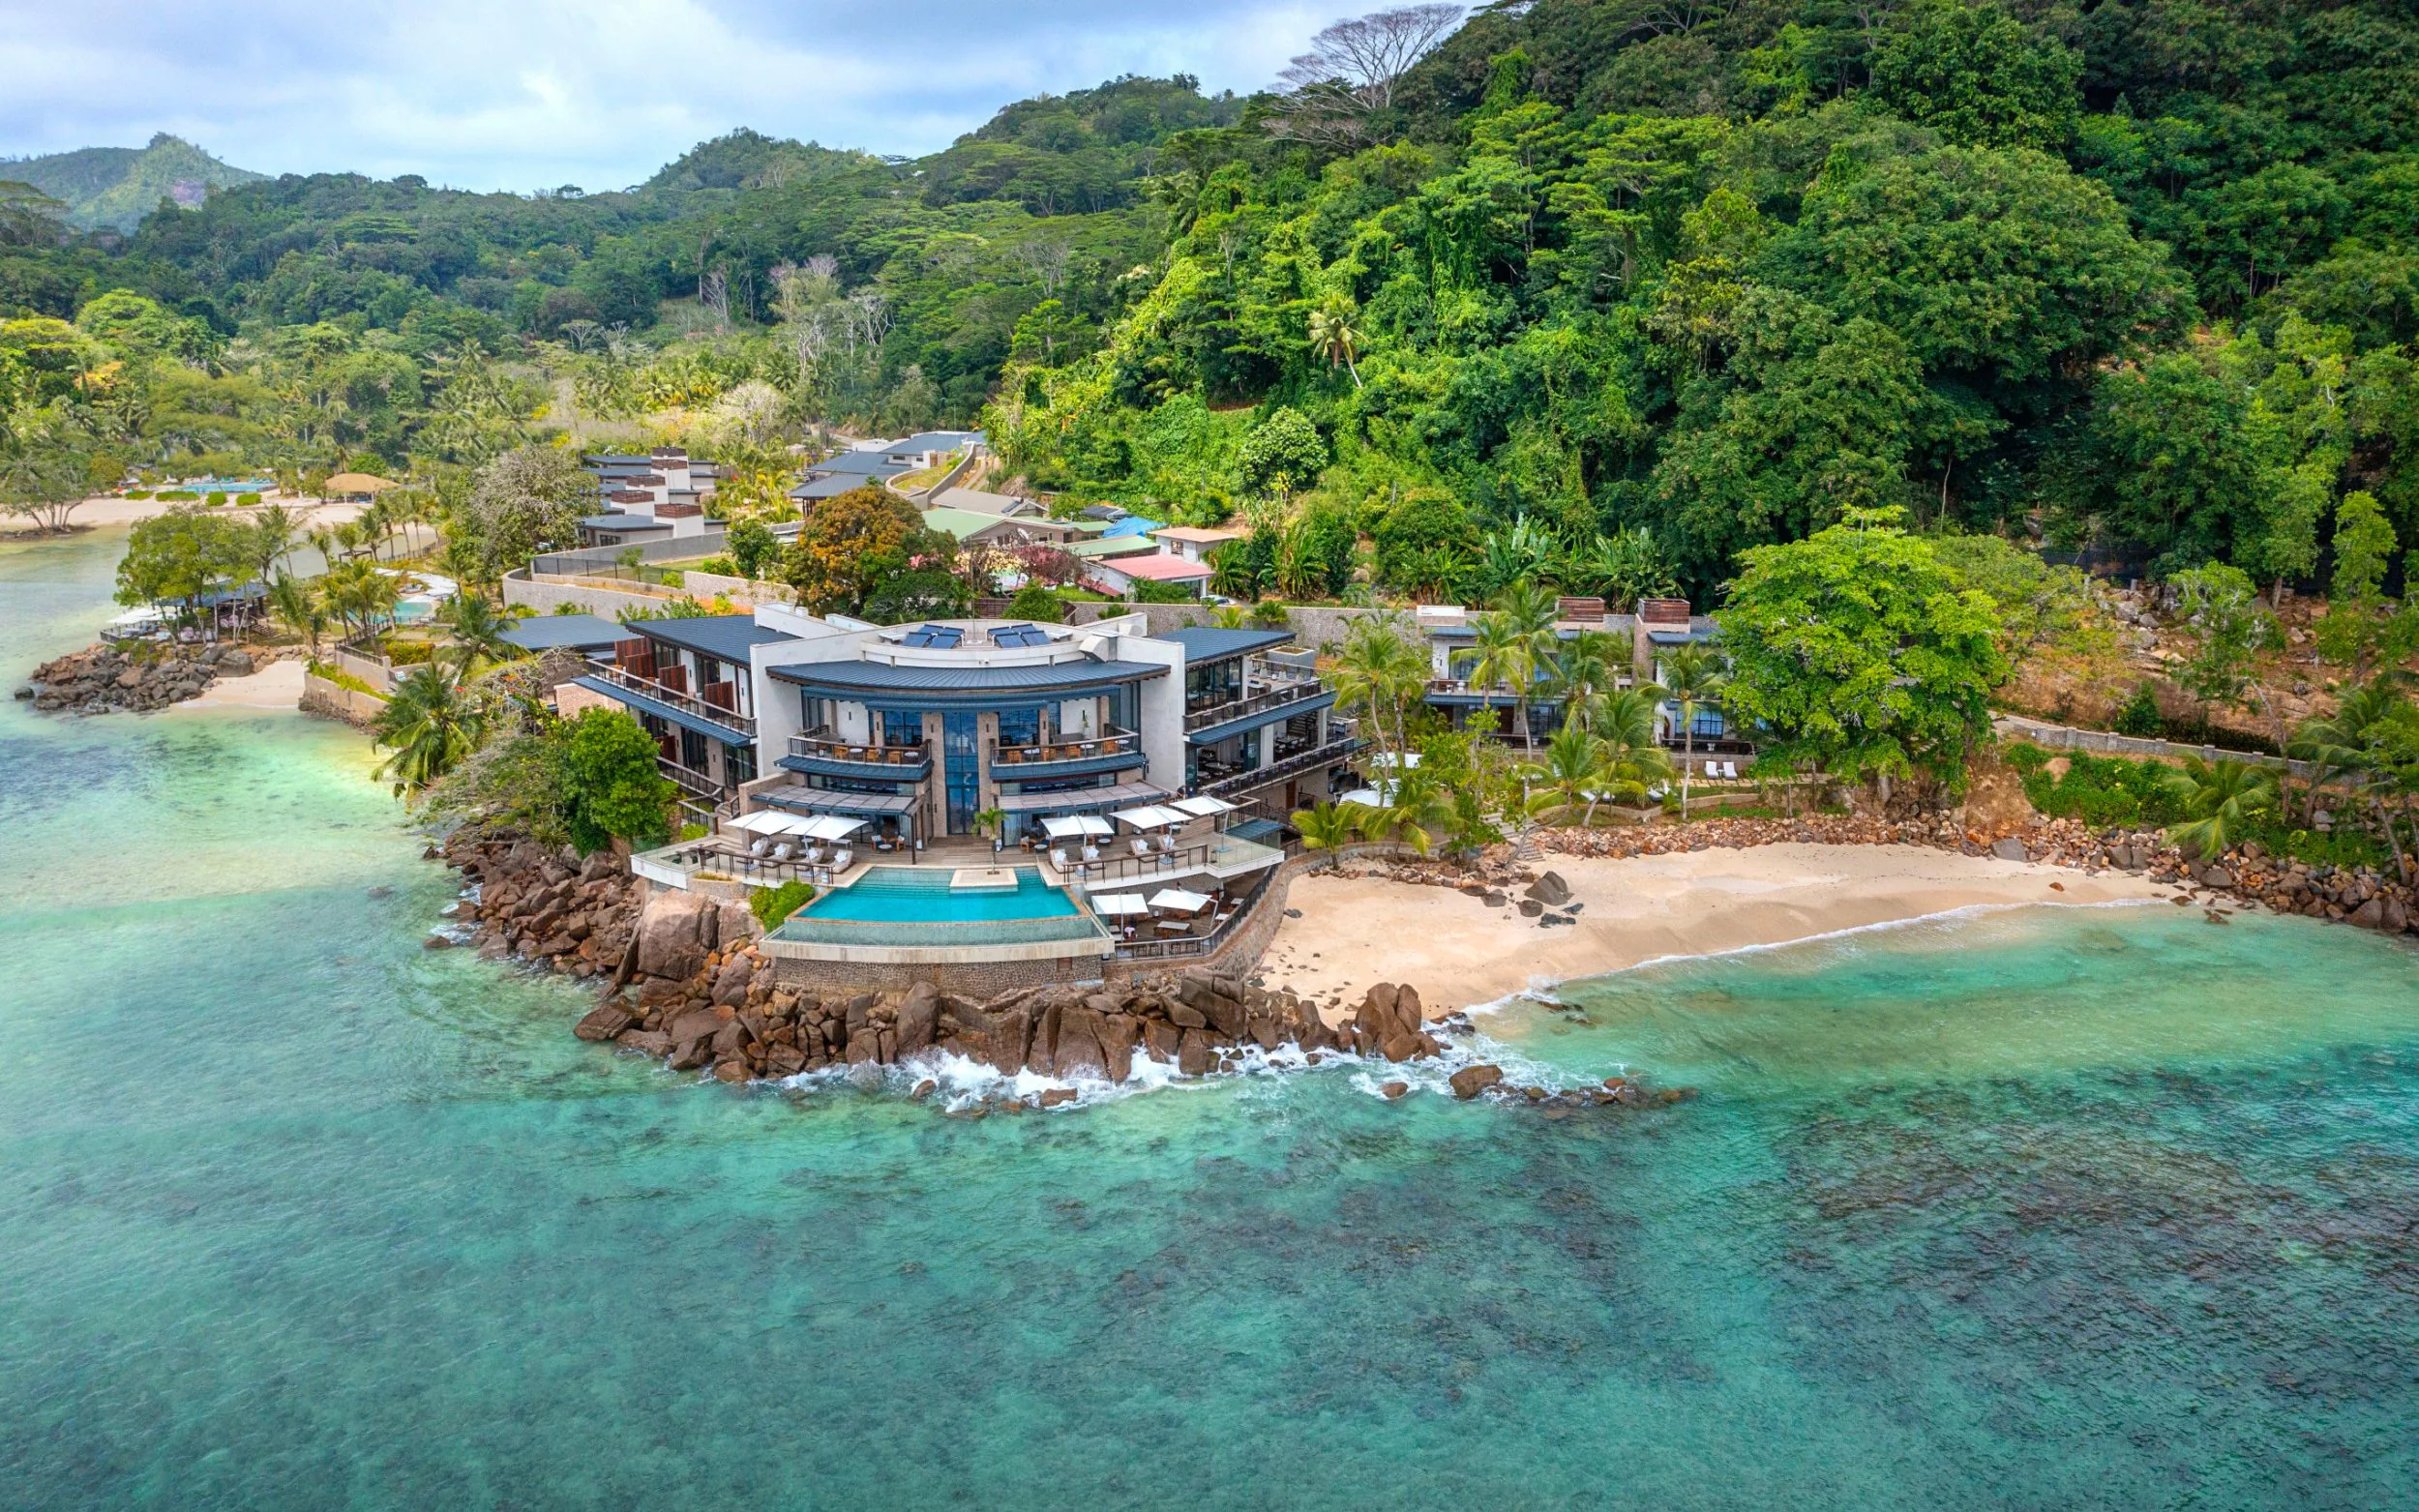 Seychelles Island is a paradise for tourists